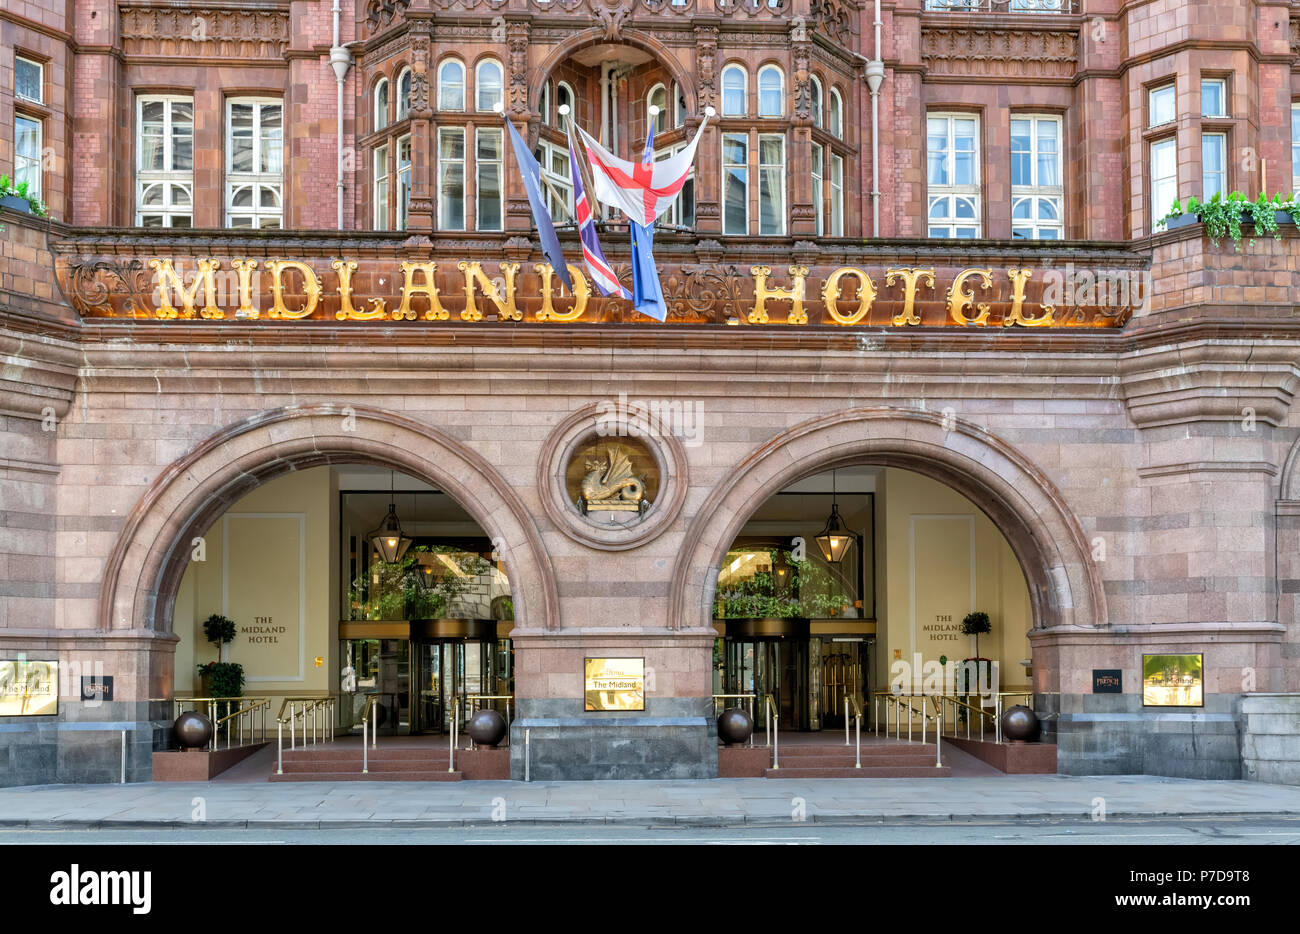 The front of the Midland Hotel in Manchester, UK Stock Photo